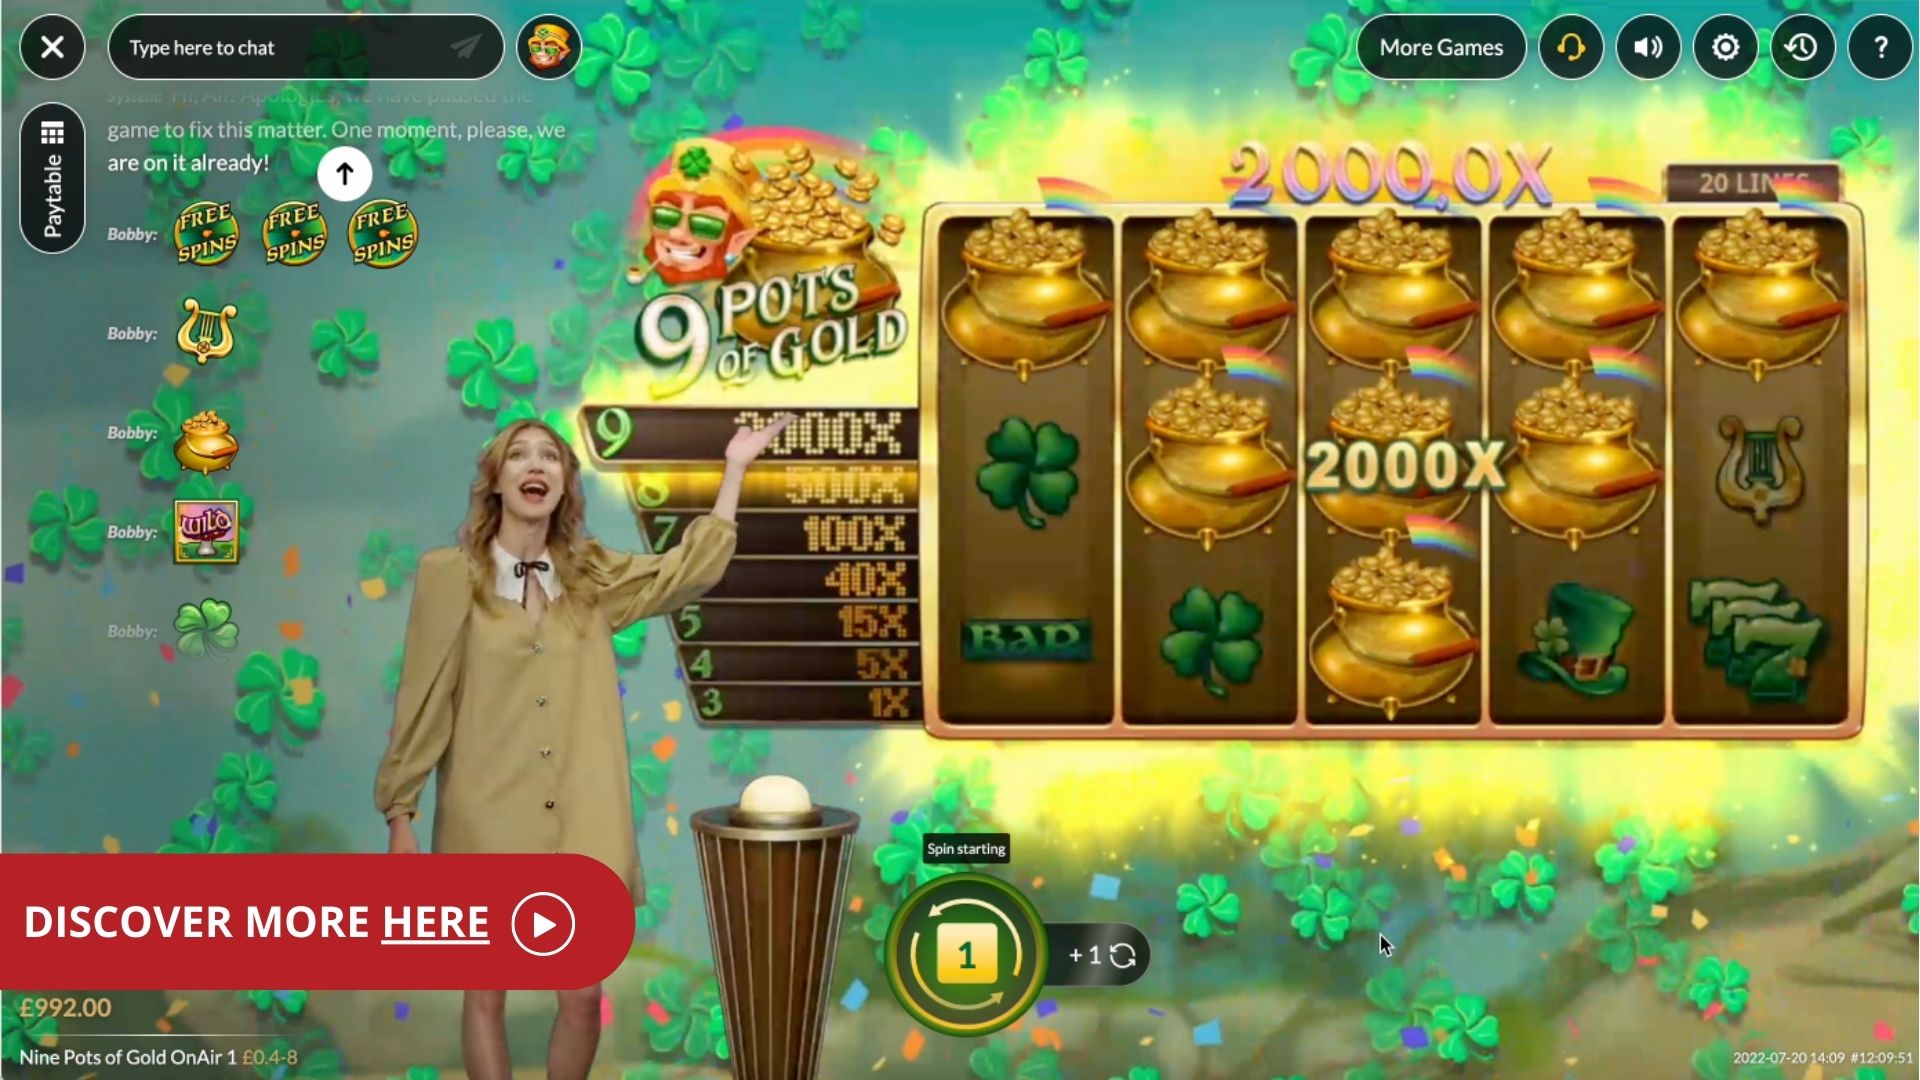 Female game presenter near the slots of 9 Pots of Gold, reading 'discover more here'.